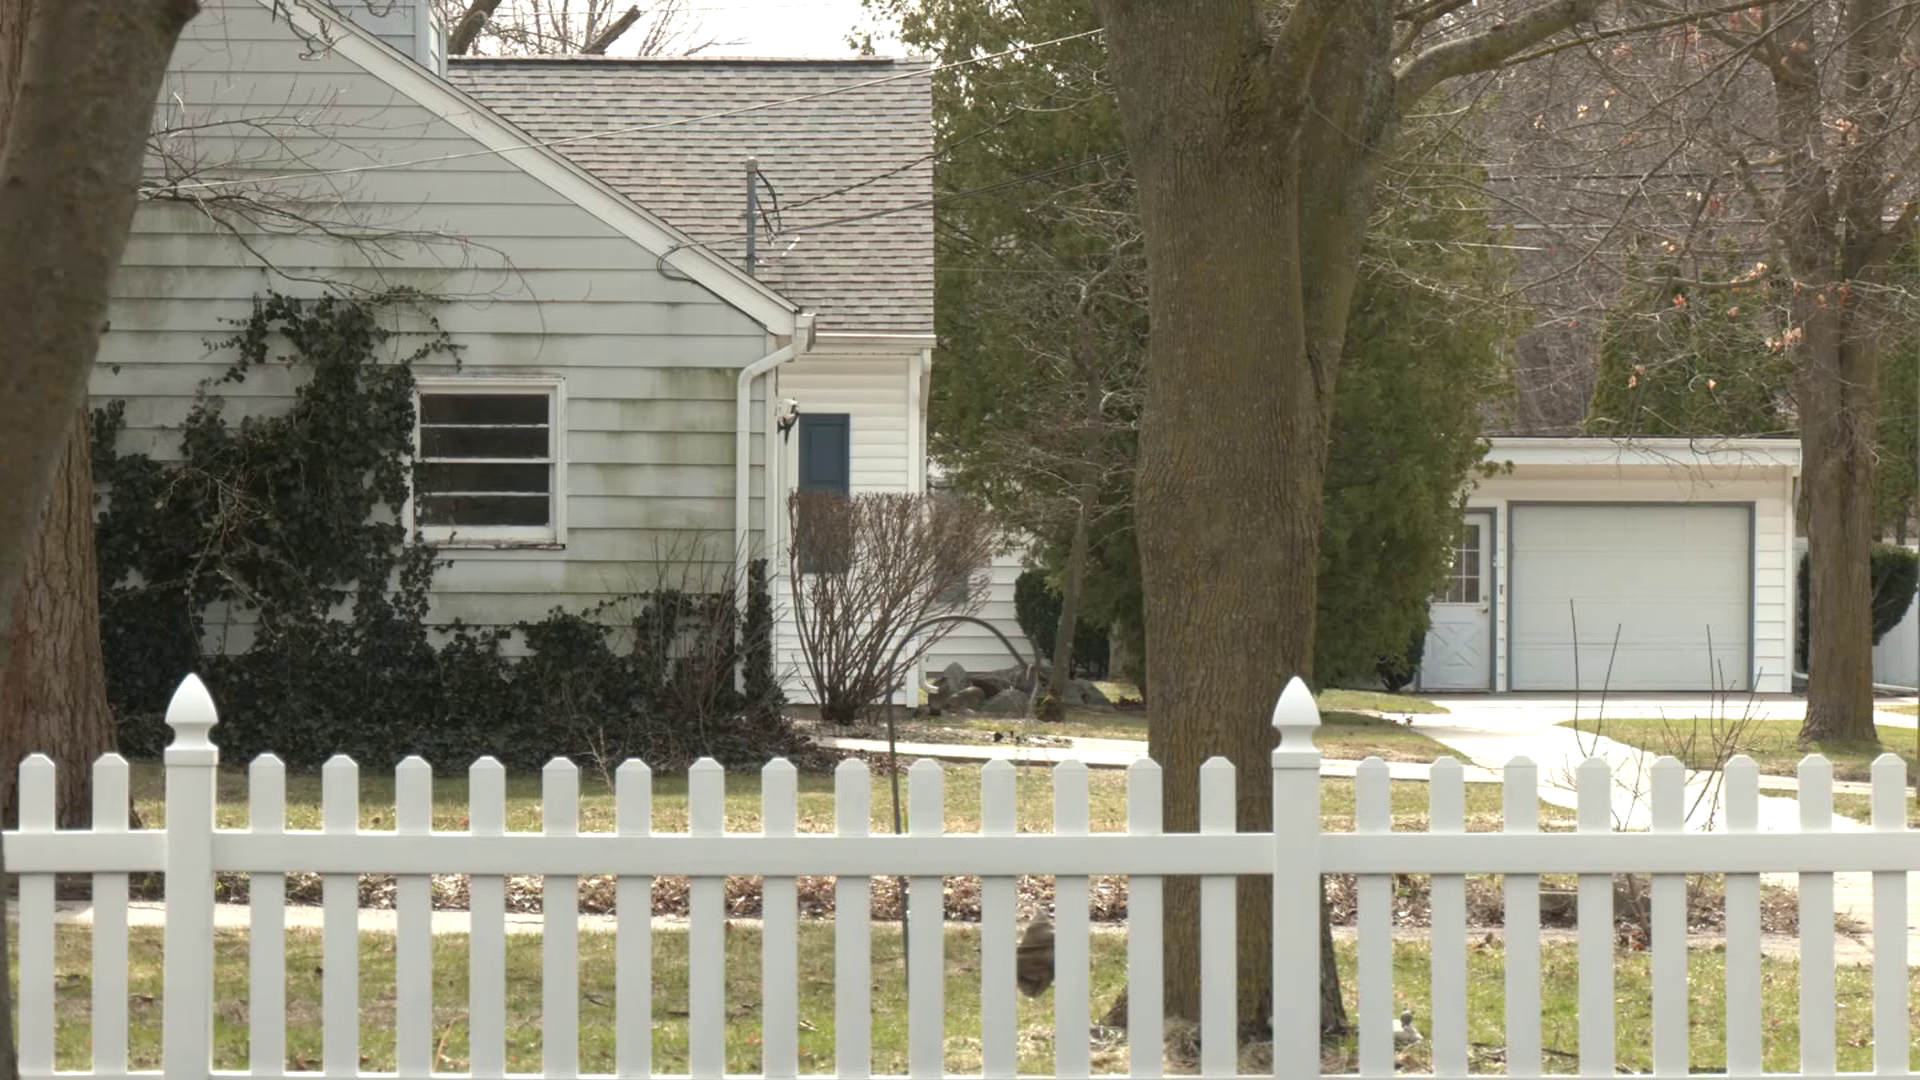 Mt. Pleasant receives grant to revitalize homes in the area